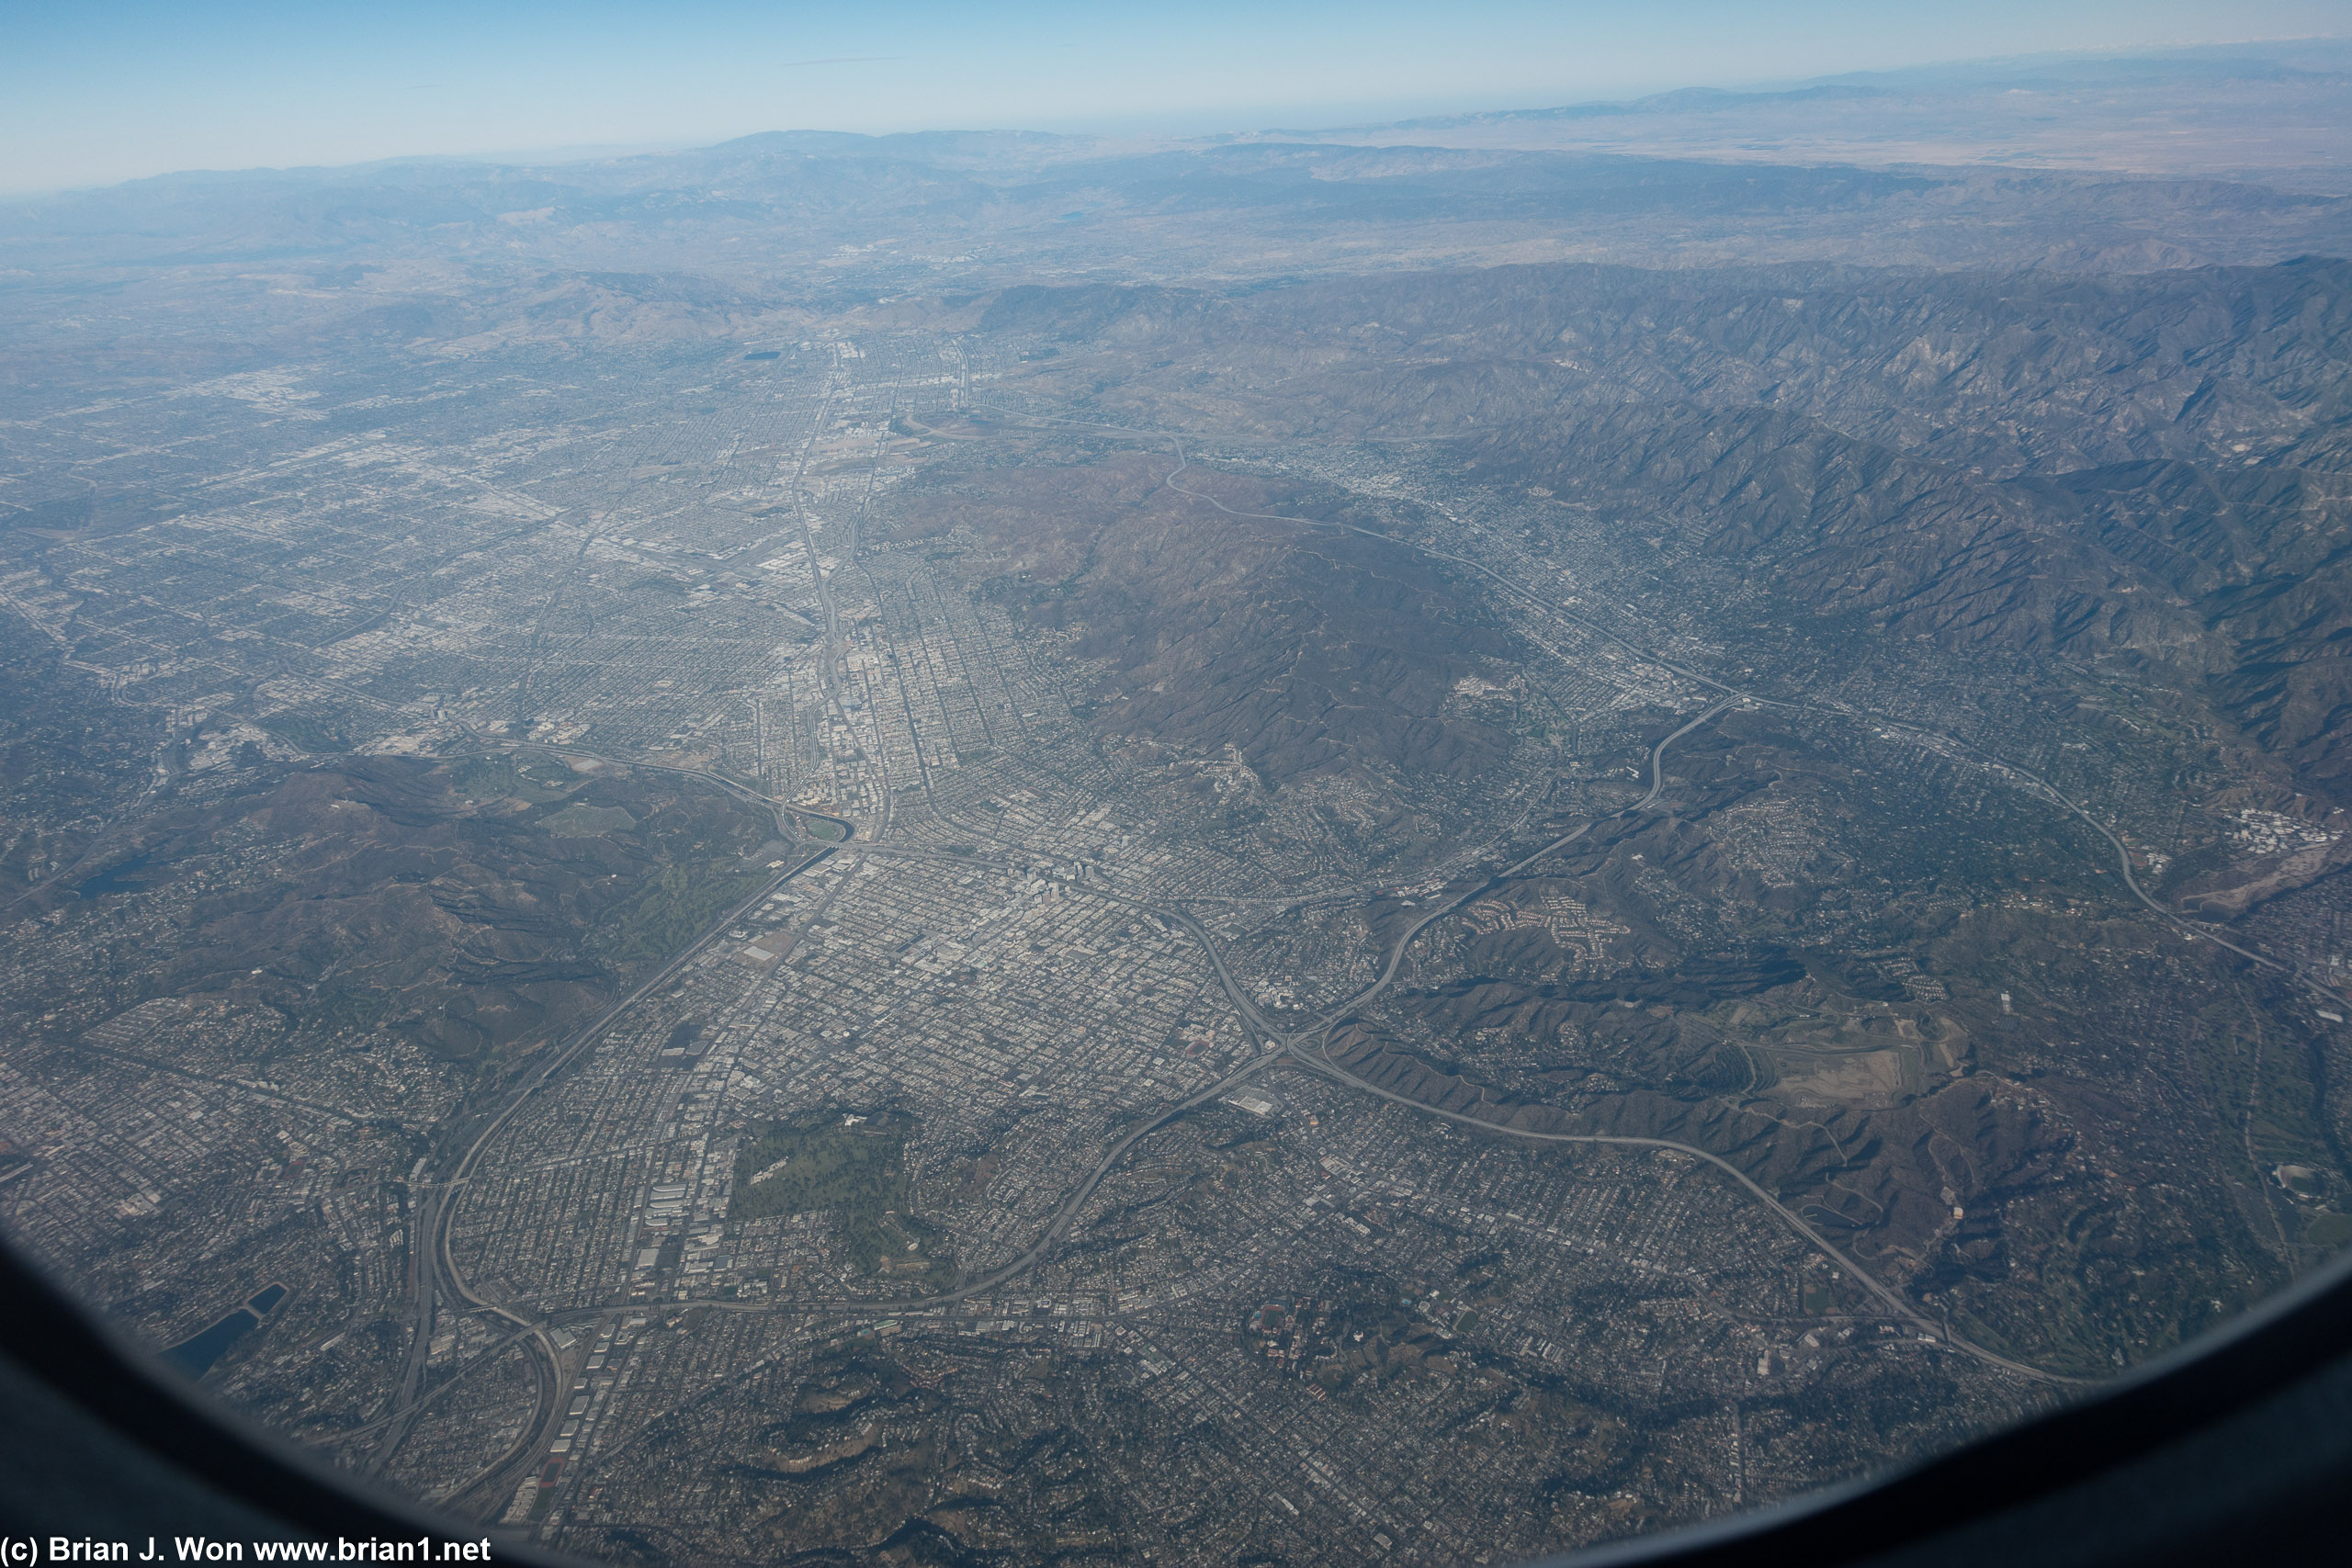 Glendale is the u-ish shape in the foreground, bordered clockwise from the west by I-5, CA-134, and CA-2.